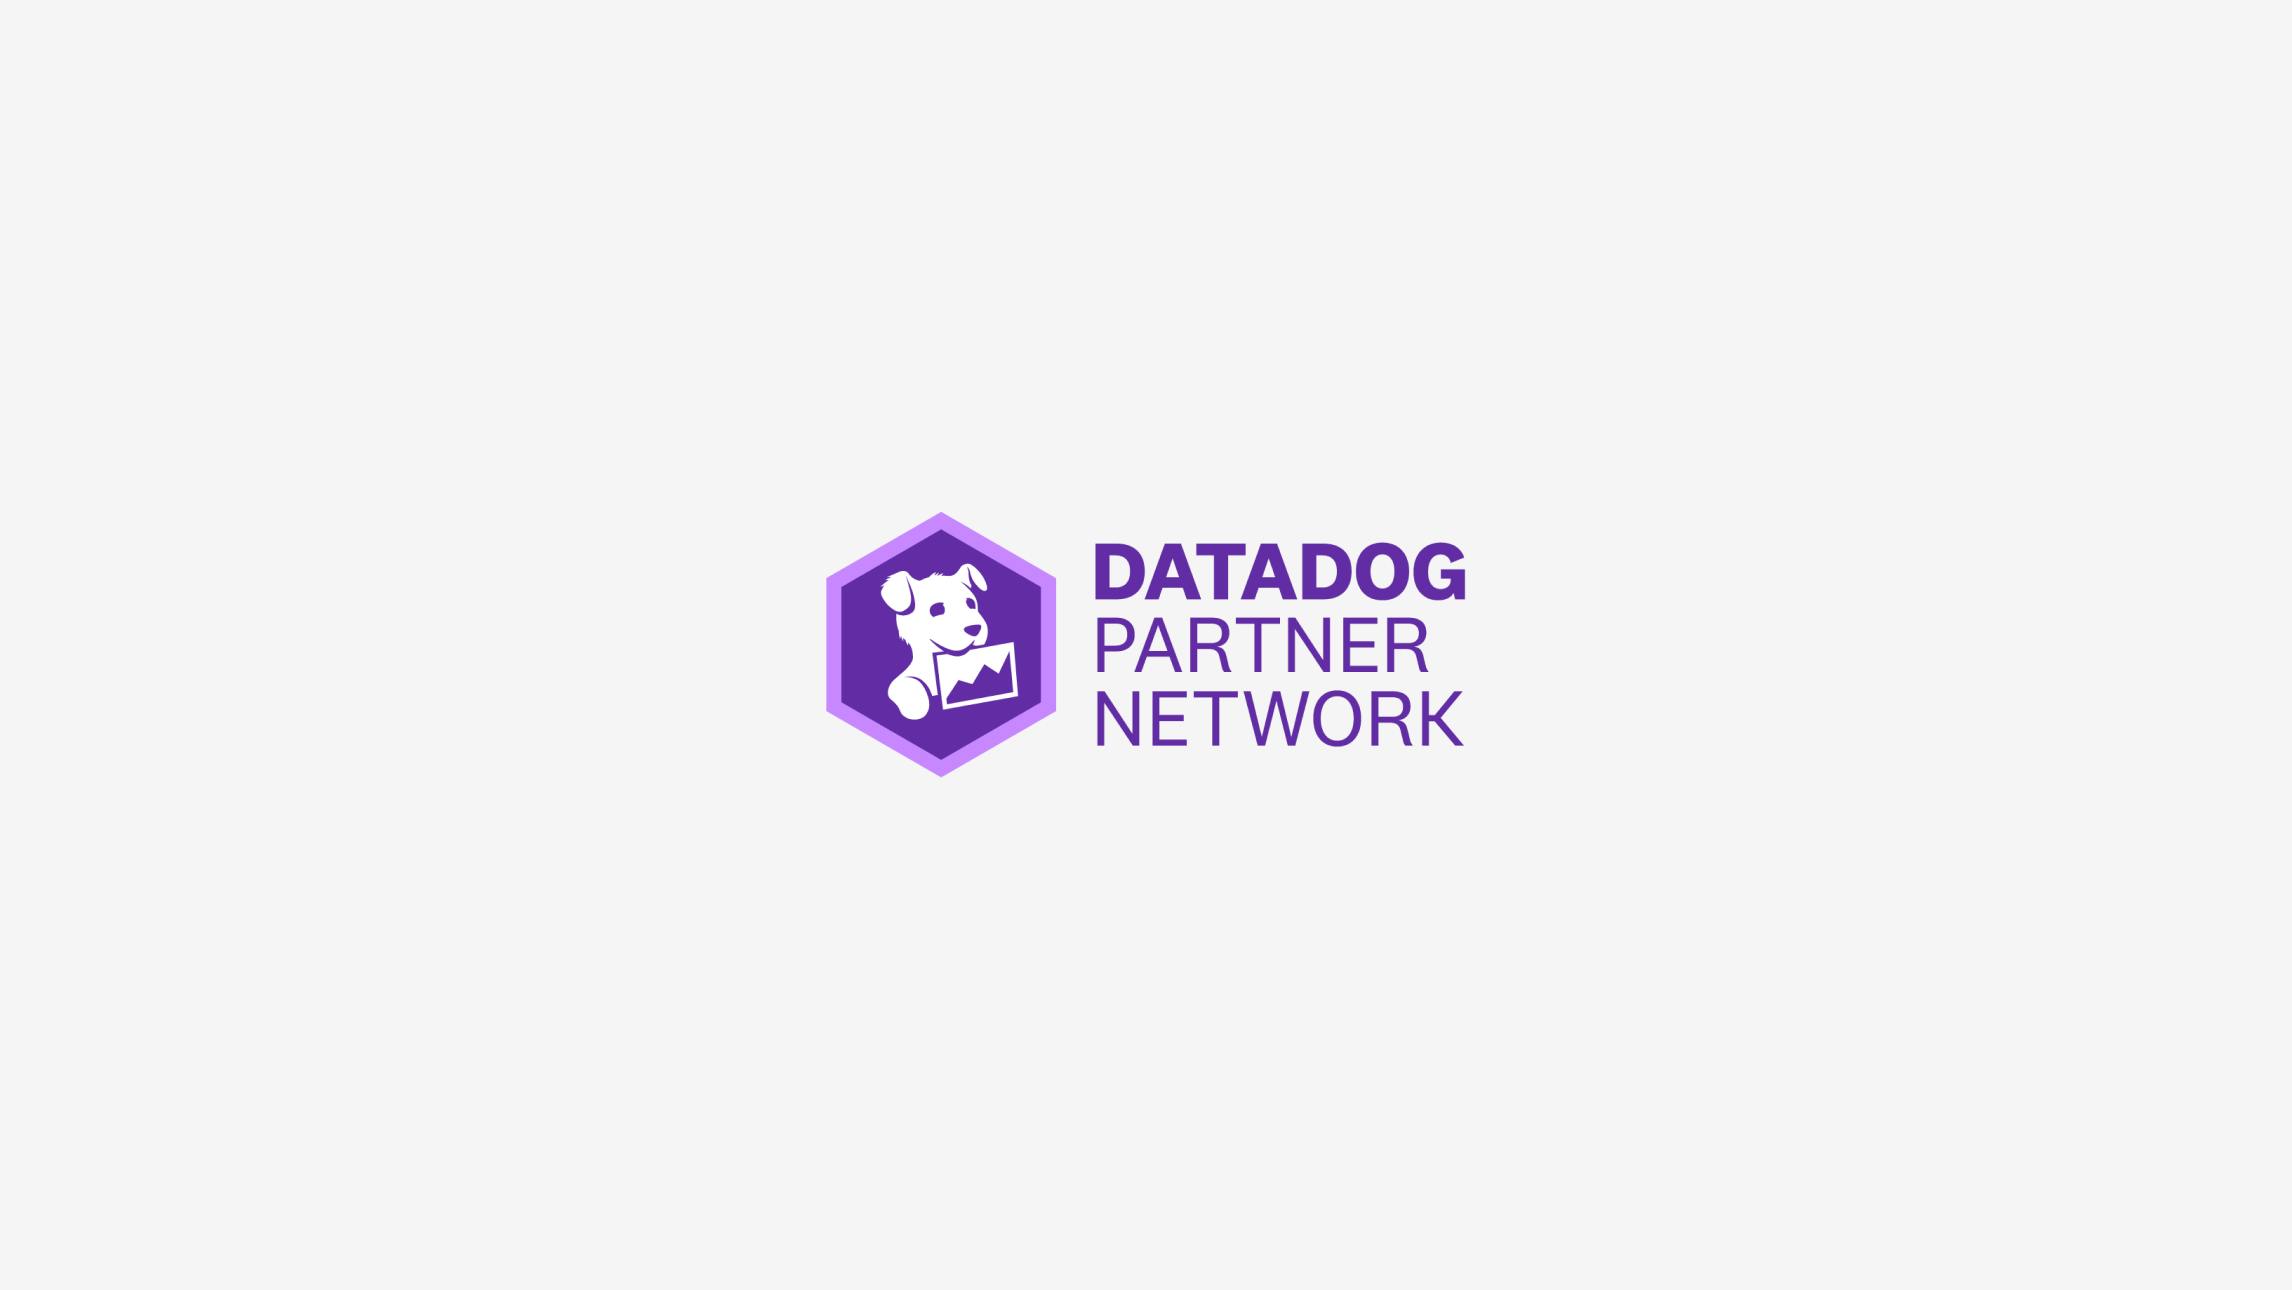 Datadog Partner Network logo centered on a light gray background. The logo is comprised of the Datadog logo(a white dog holding a chart in his mouth) centered on a purple hexagon with a light purple border and the text Datadog(bold) Partner Network printed on three lines adjacent to the hexagon.